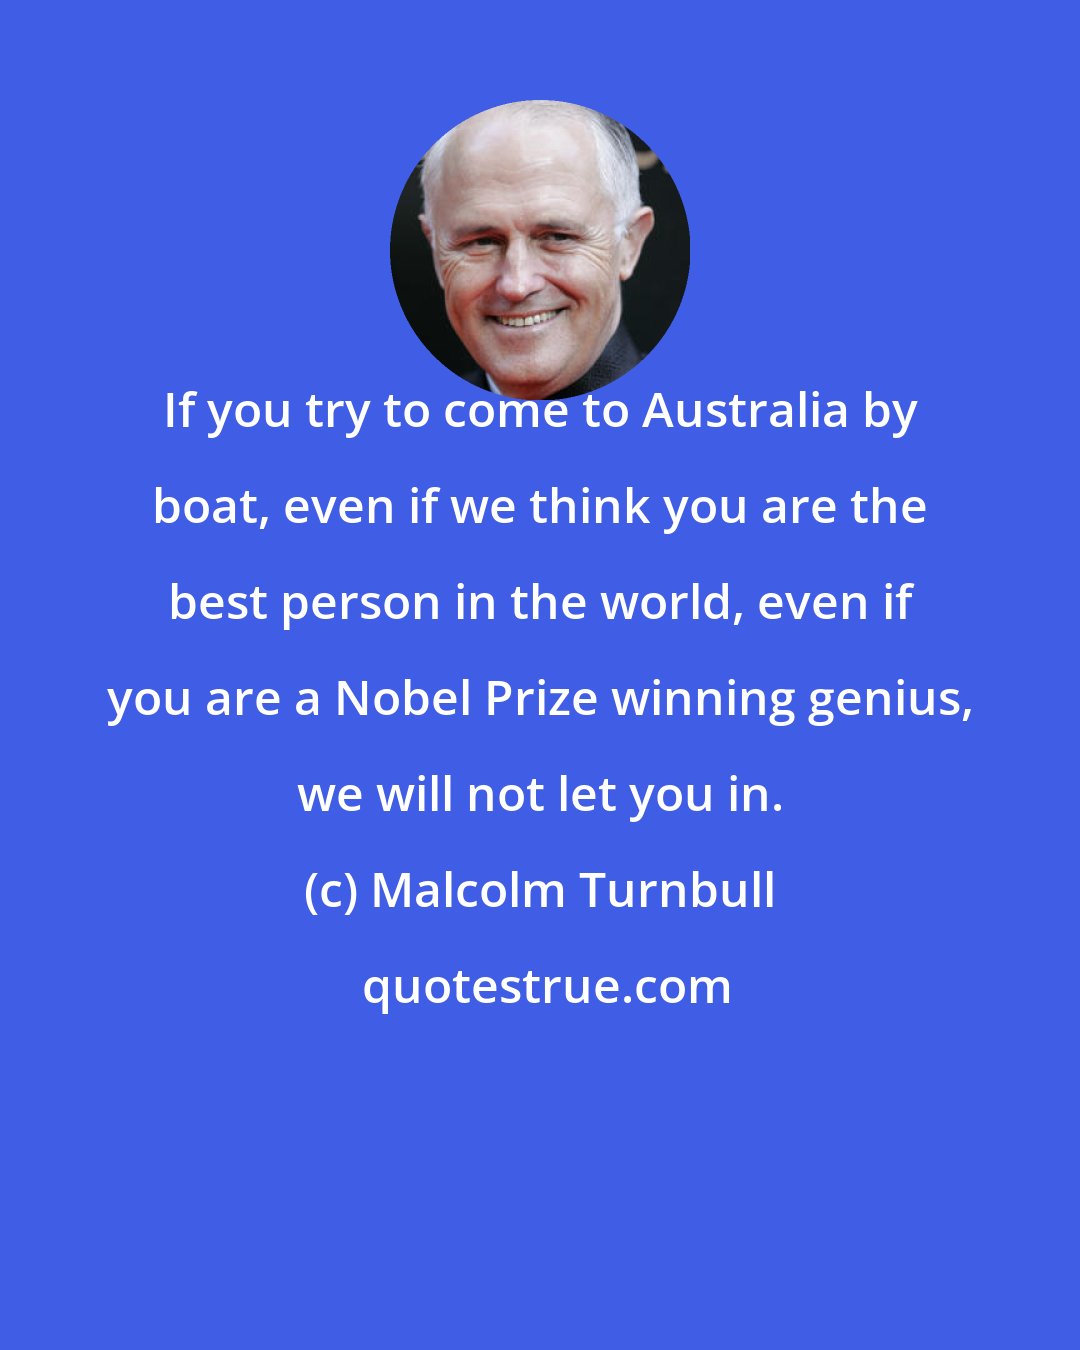 Malcolm Turnbull: If you try to come to Australia by boat, even if we think you are the best person in the world, even if you are a Nobel Prize winning genius, we will not let you in.